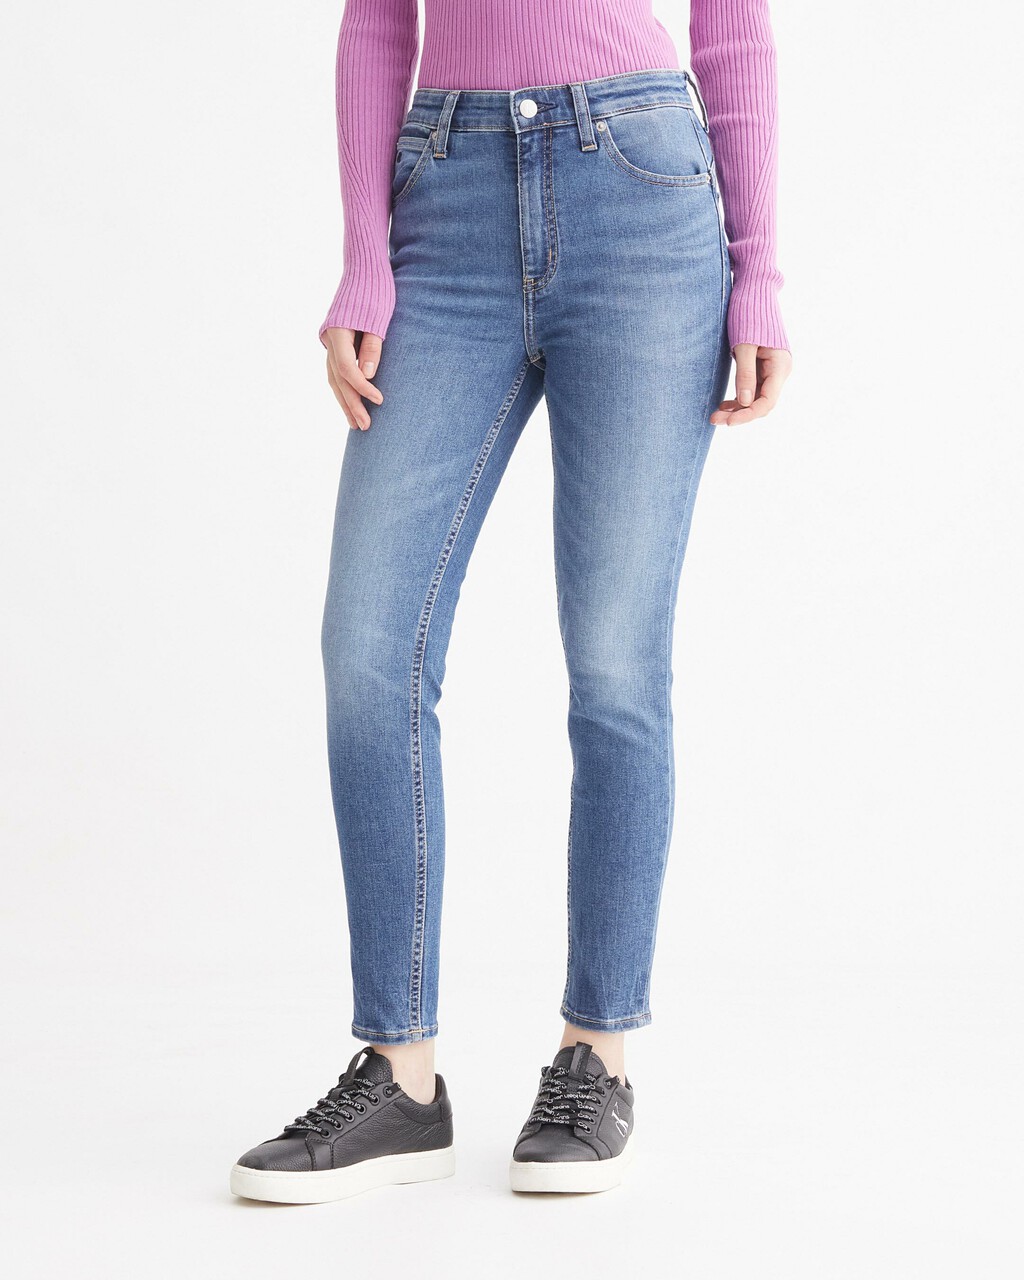 37.5 HIGH RISE BODY SKINNY JEANS, Mid Blue Back Embro, hi-res